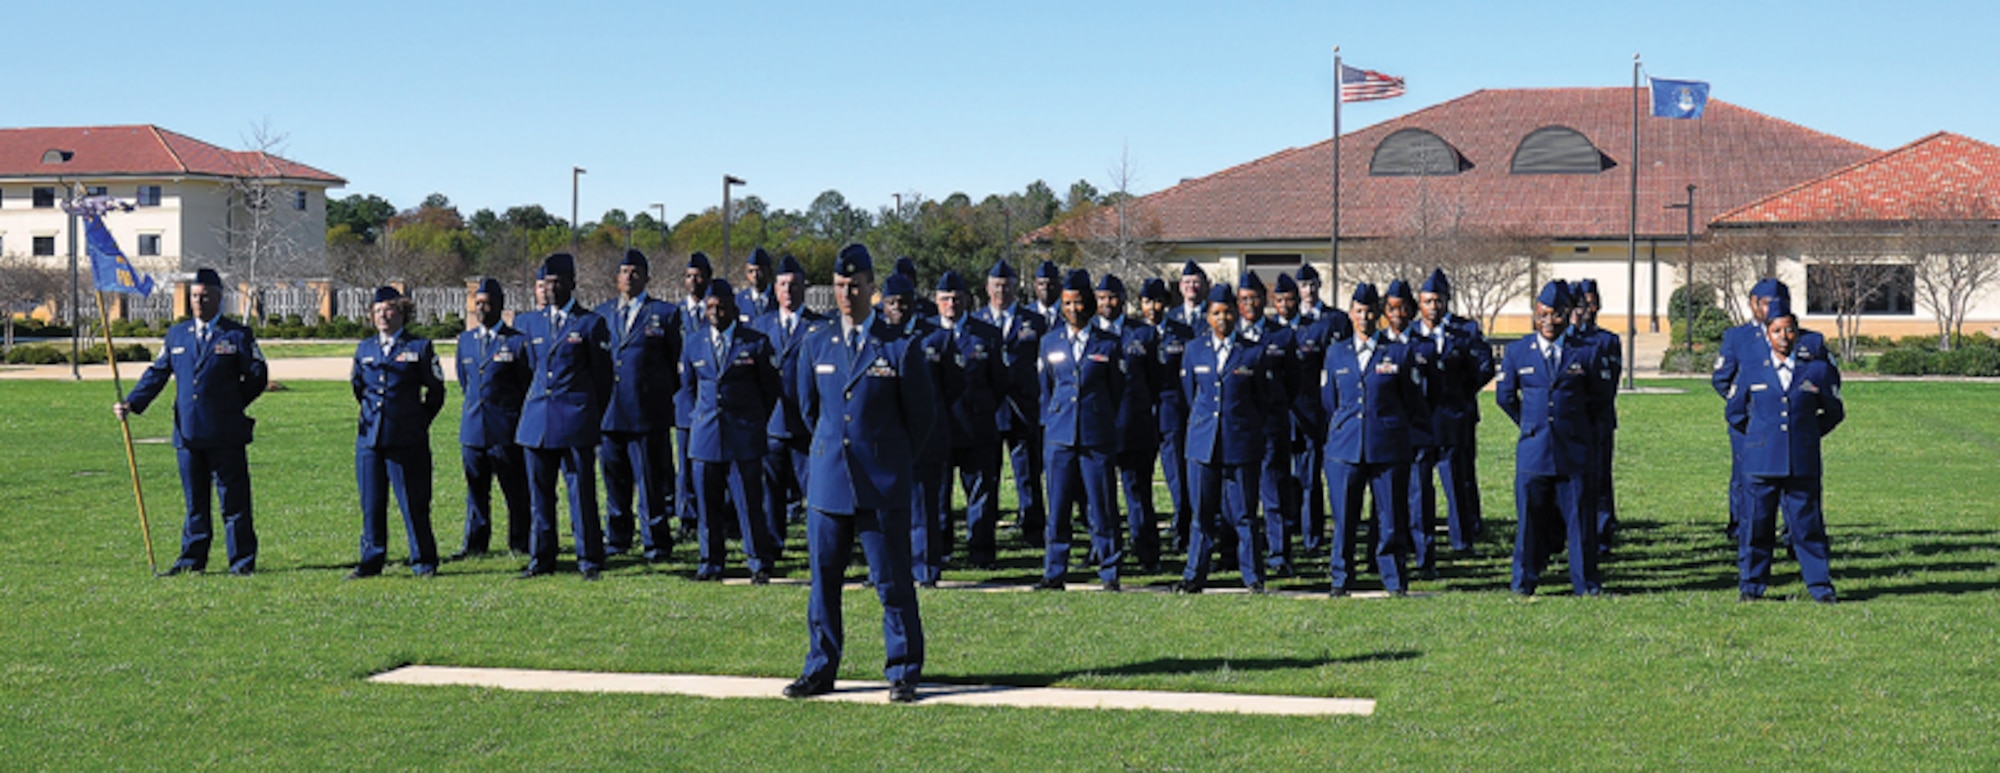 Members of the newly formed 908th Force Support Squadron stand at ease during the assumption of command ceremony. (Air Force photo by Gene H. Hughes)